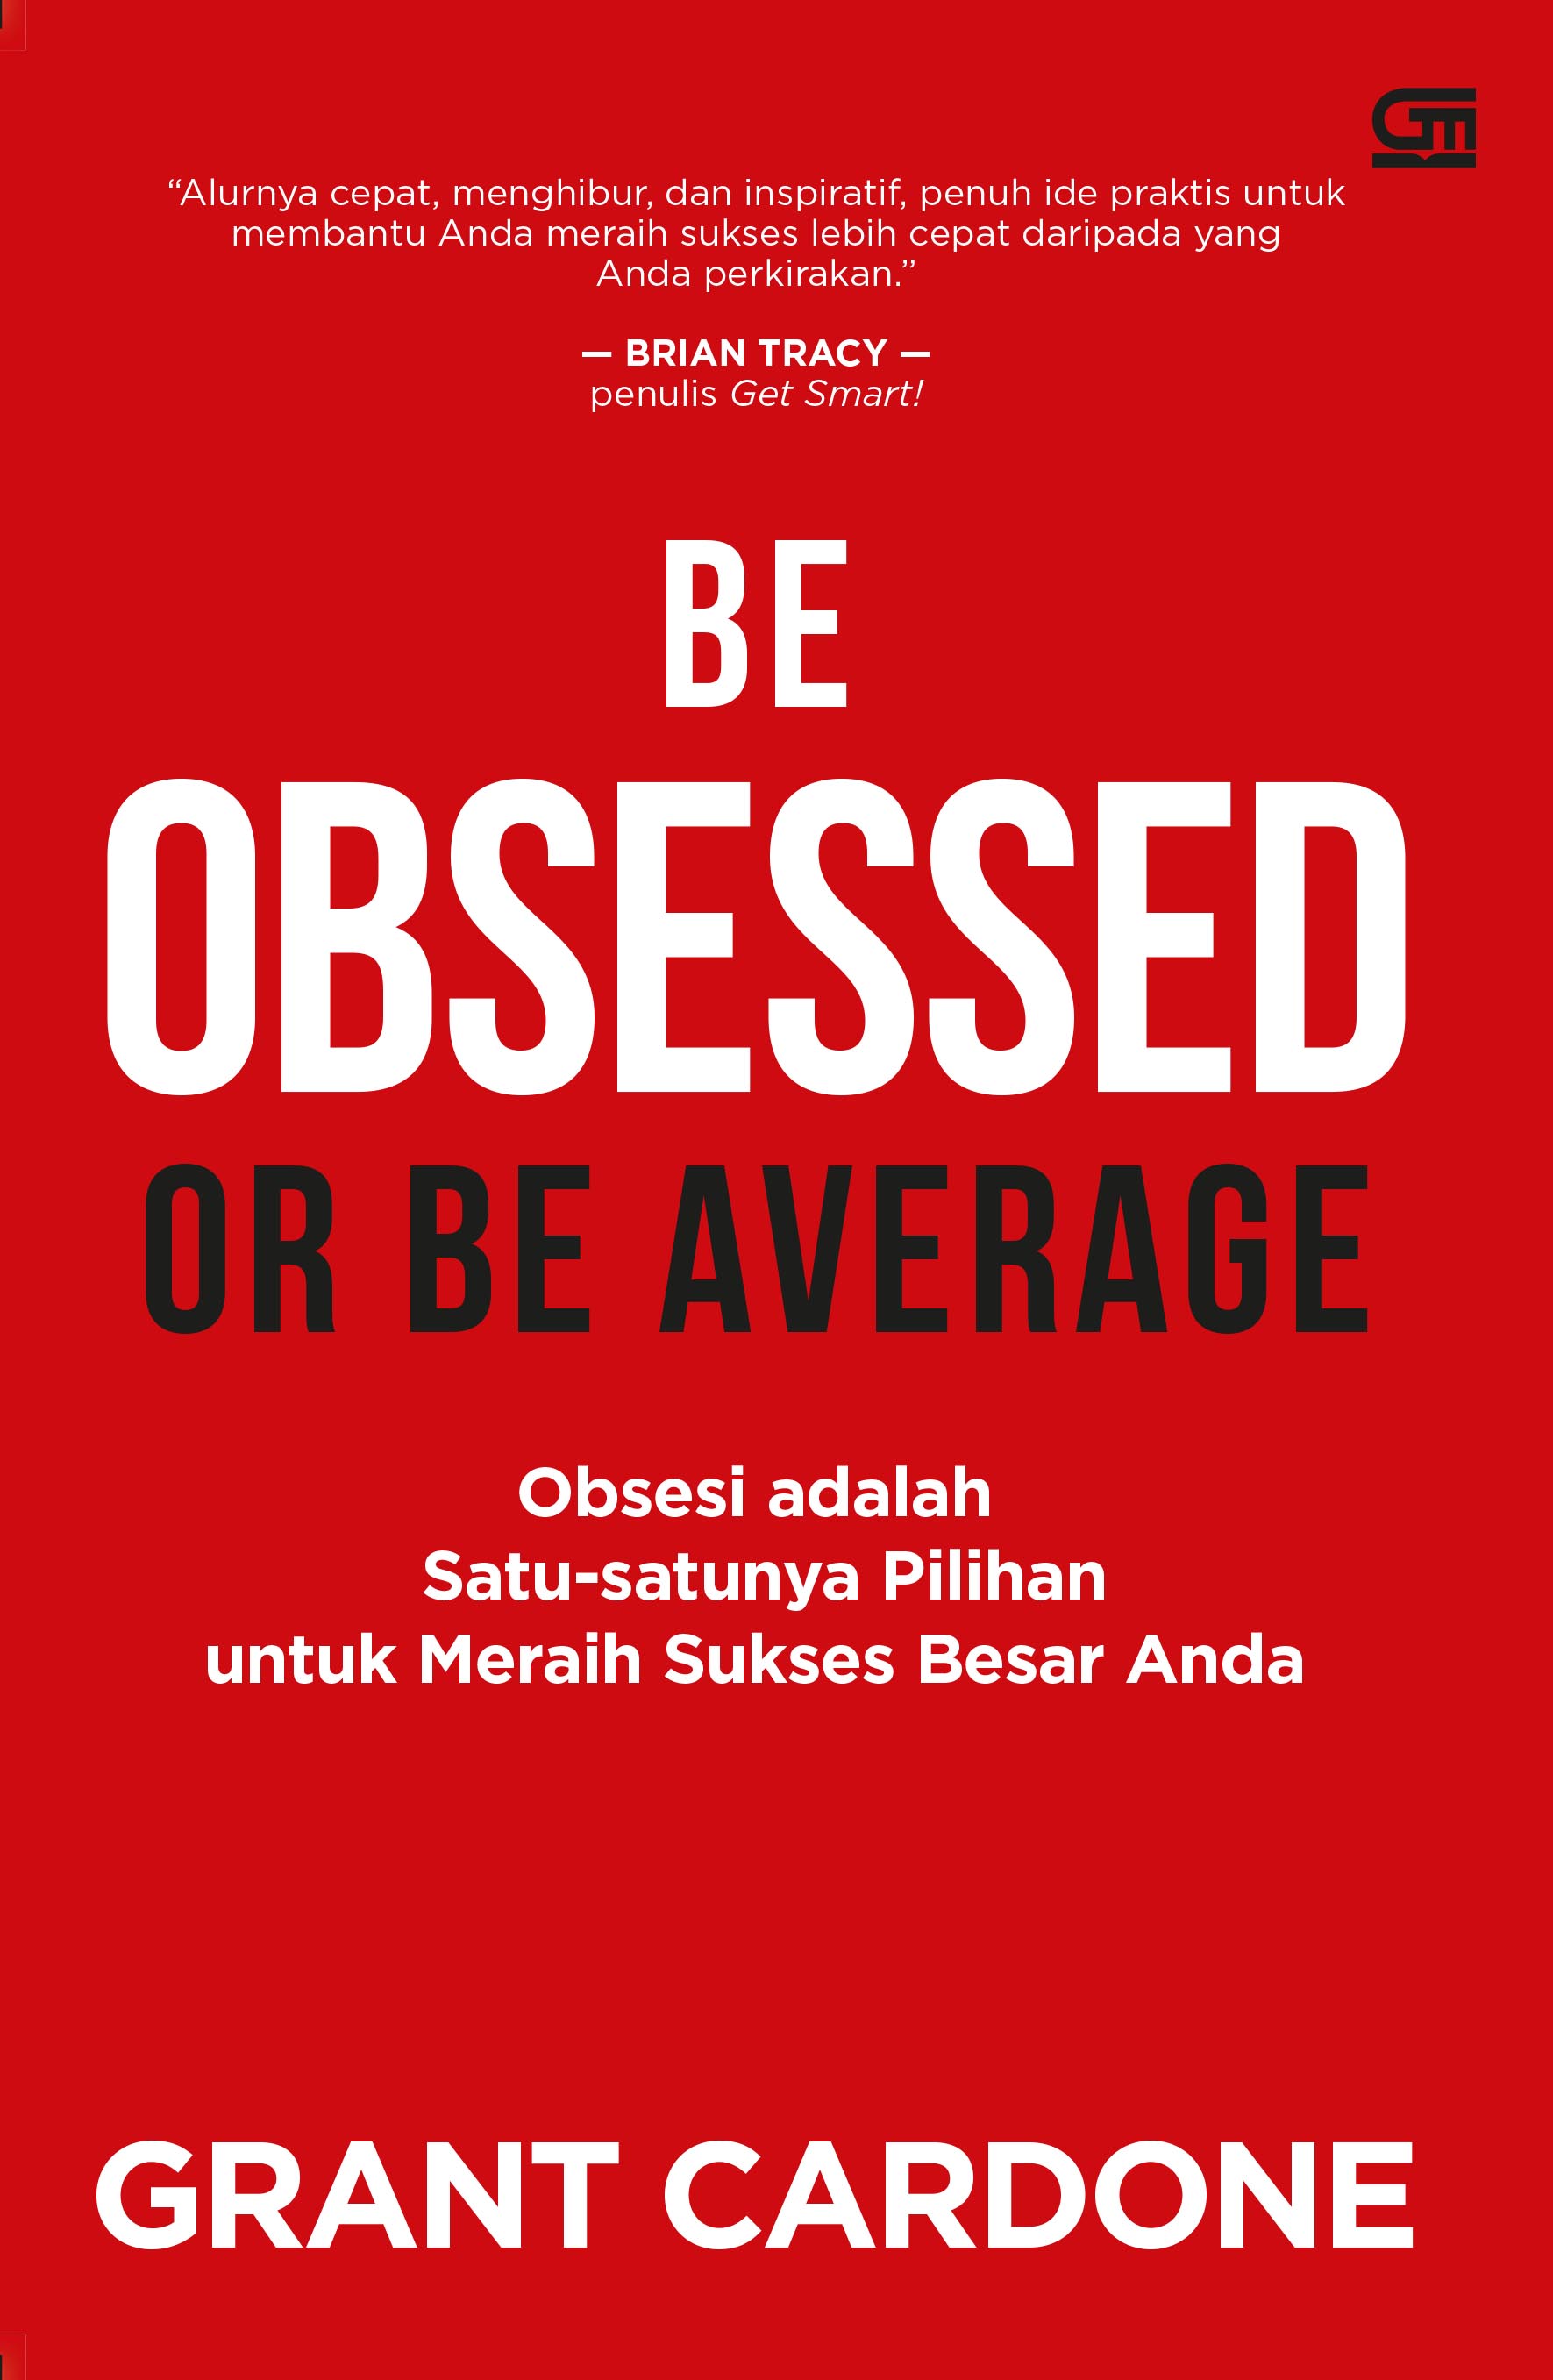 Be Obsessed or Be Average